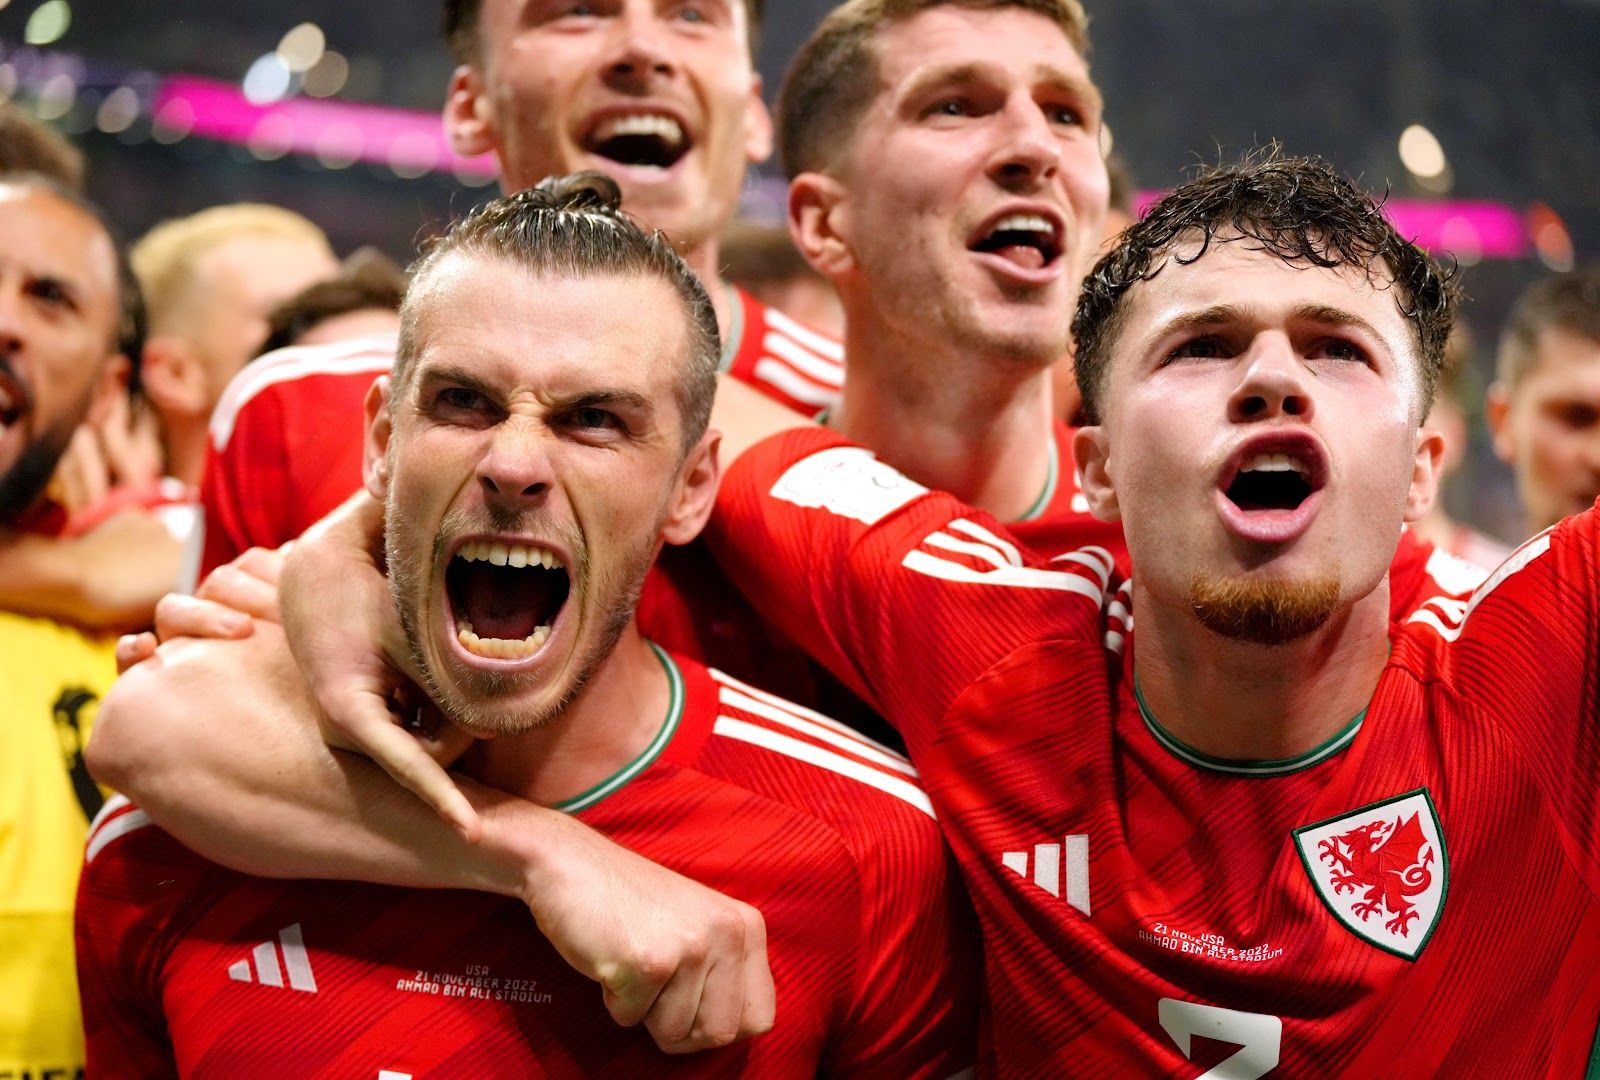 Graphic showing the Welsh national team celebrating in the World Cup 2022 in Qatar